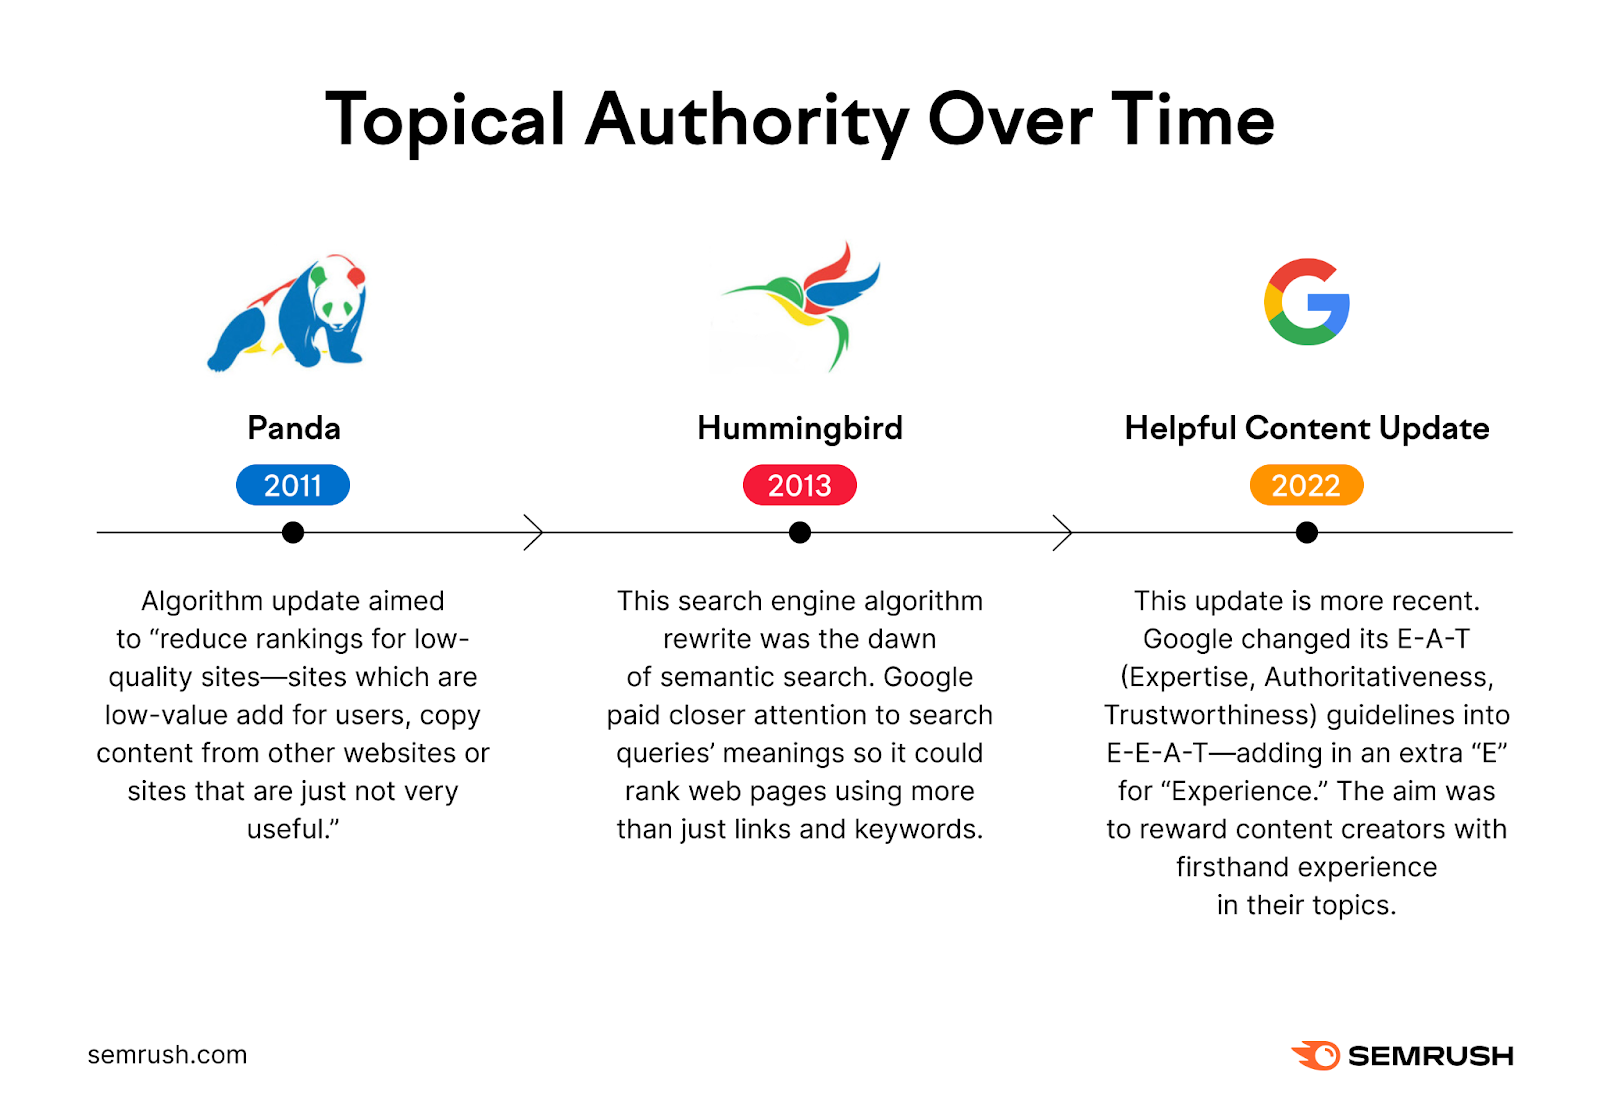 Semrush infographic on topical authority over time